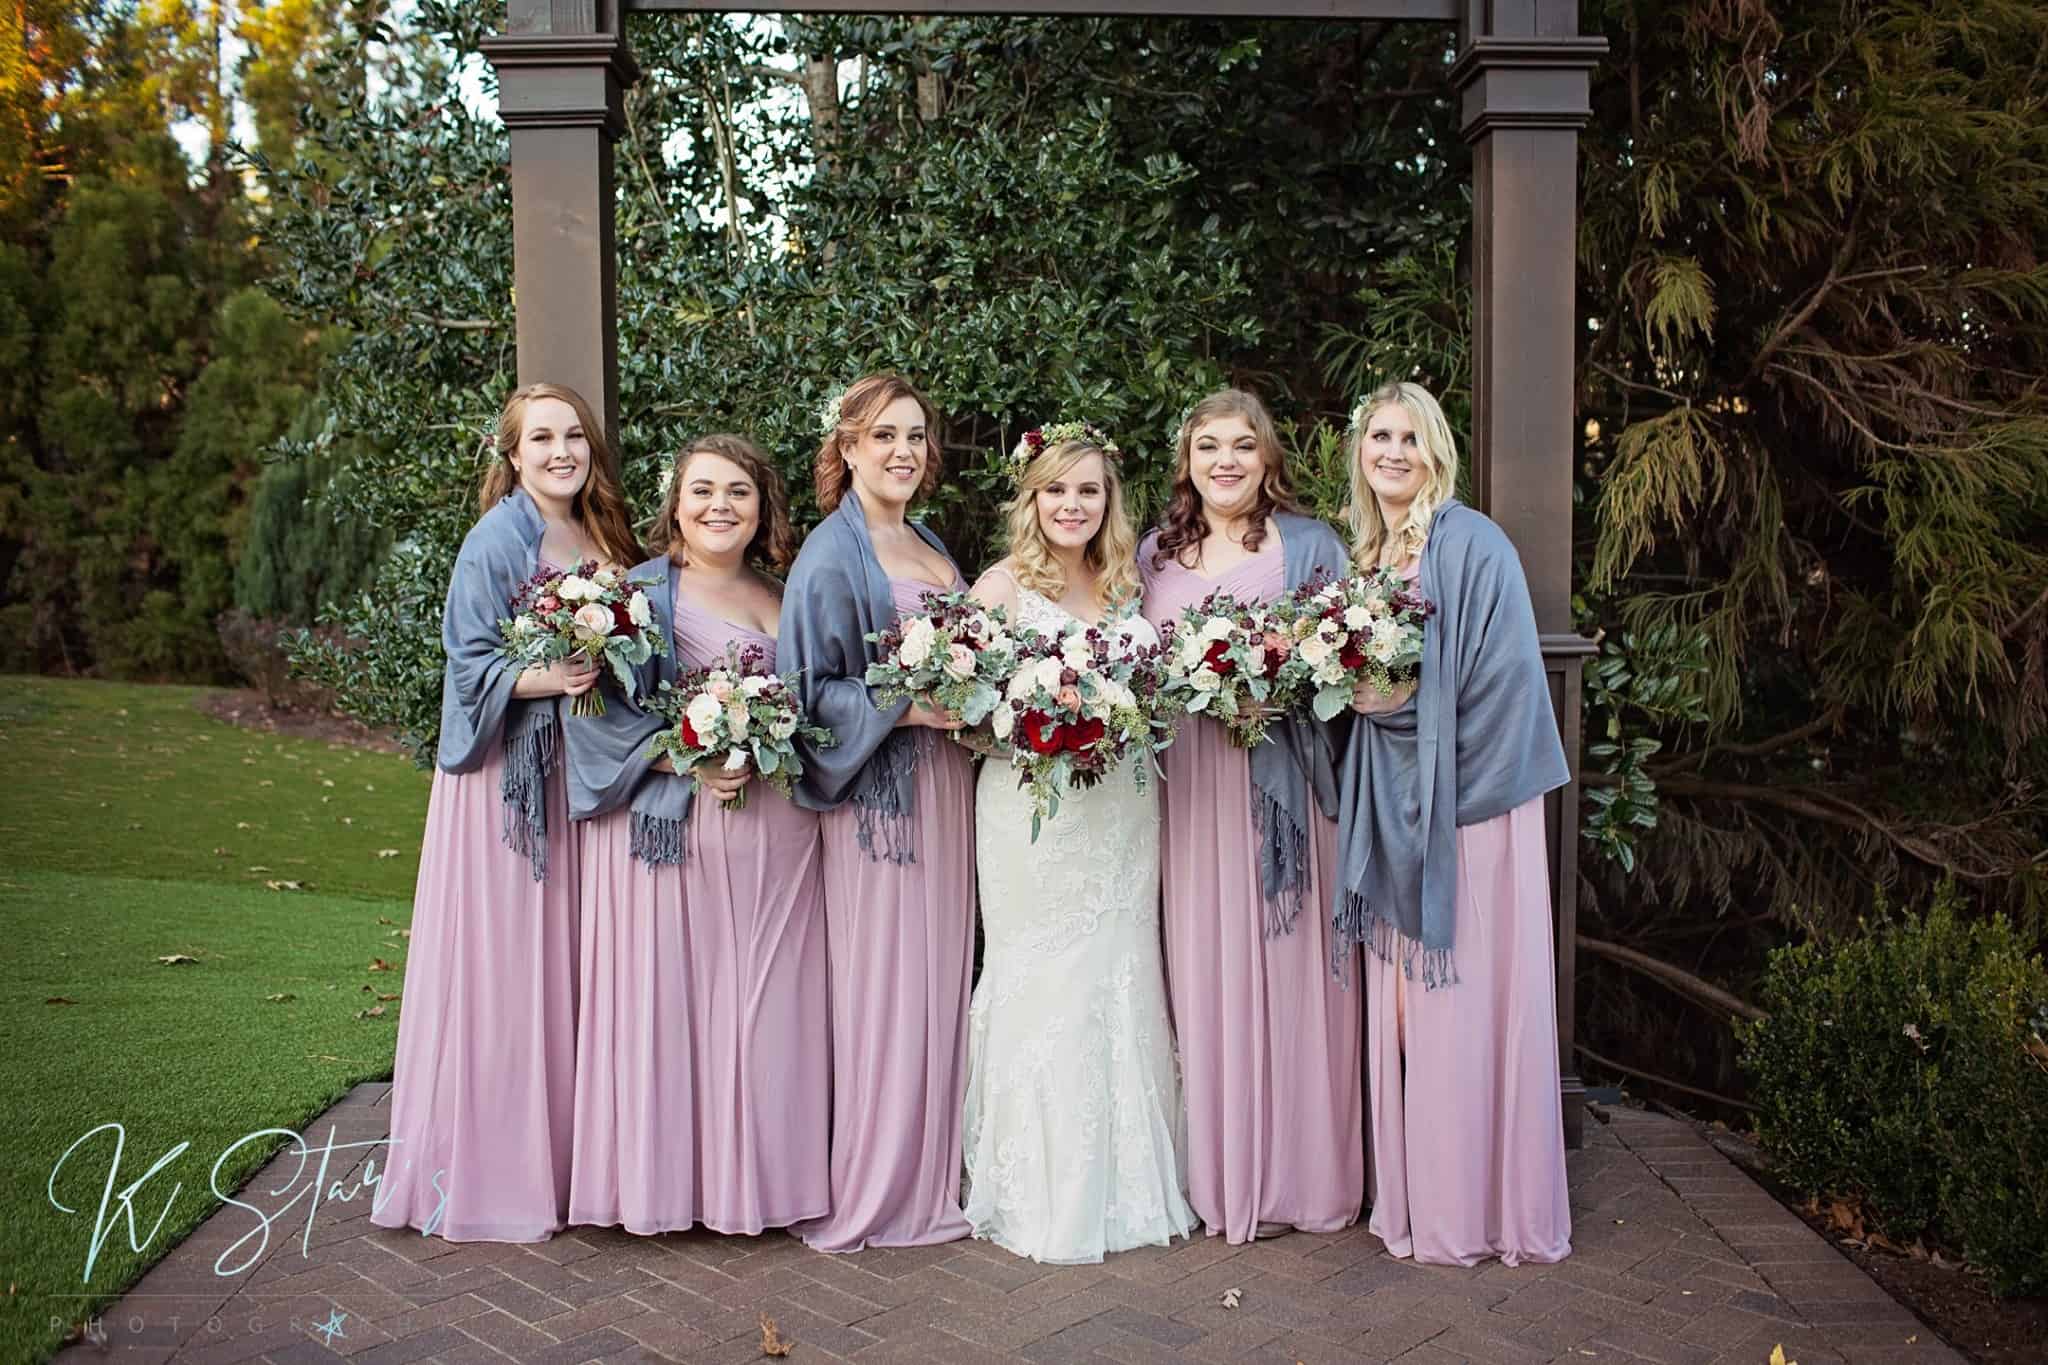 Bride in white with her bridesmaids wearing pastel pink dresses with gray shawls - Kstar's photography - forever bridal wedding shows - highgrove estat 